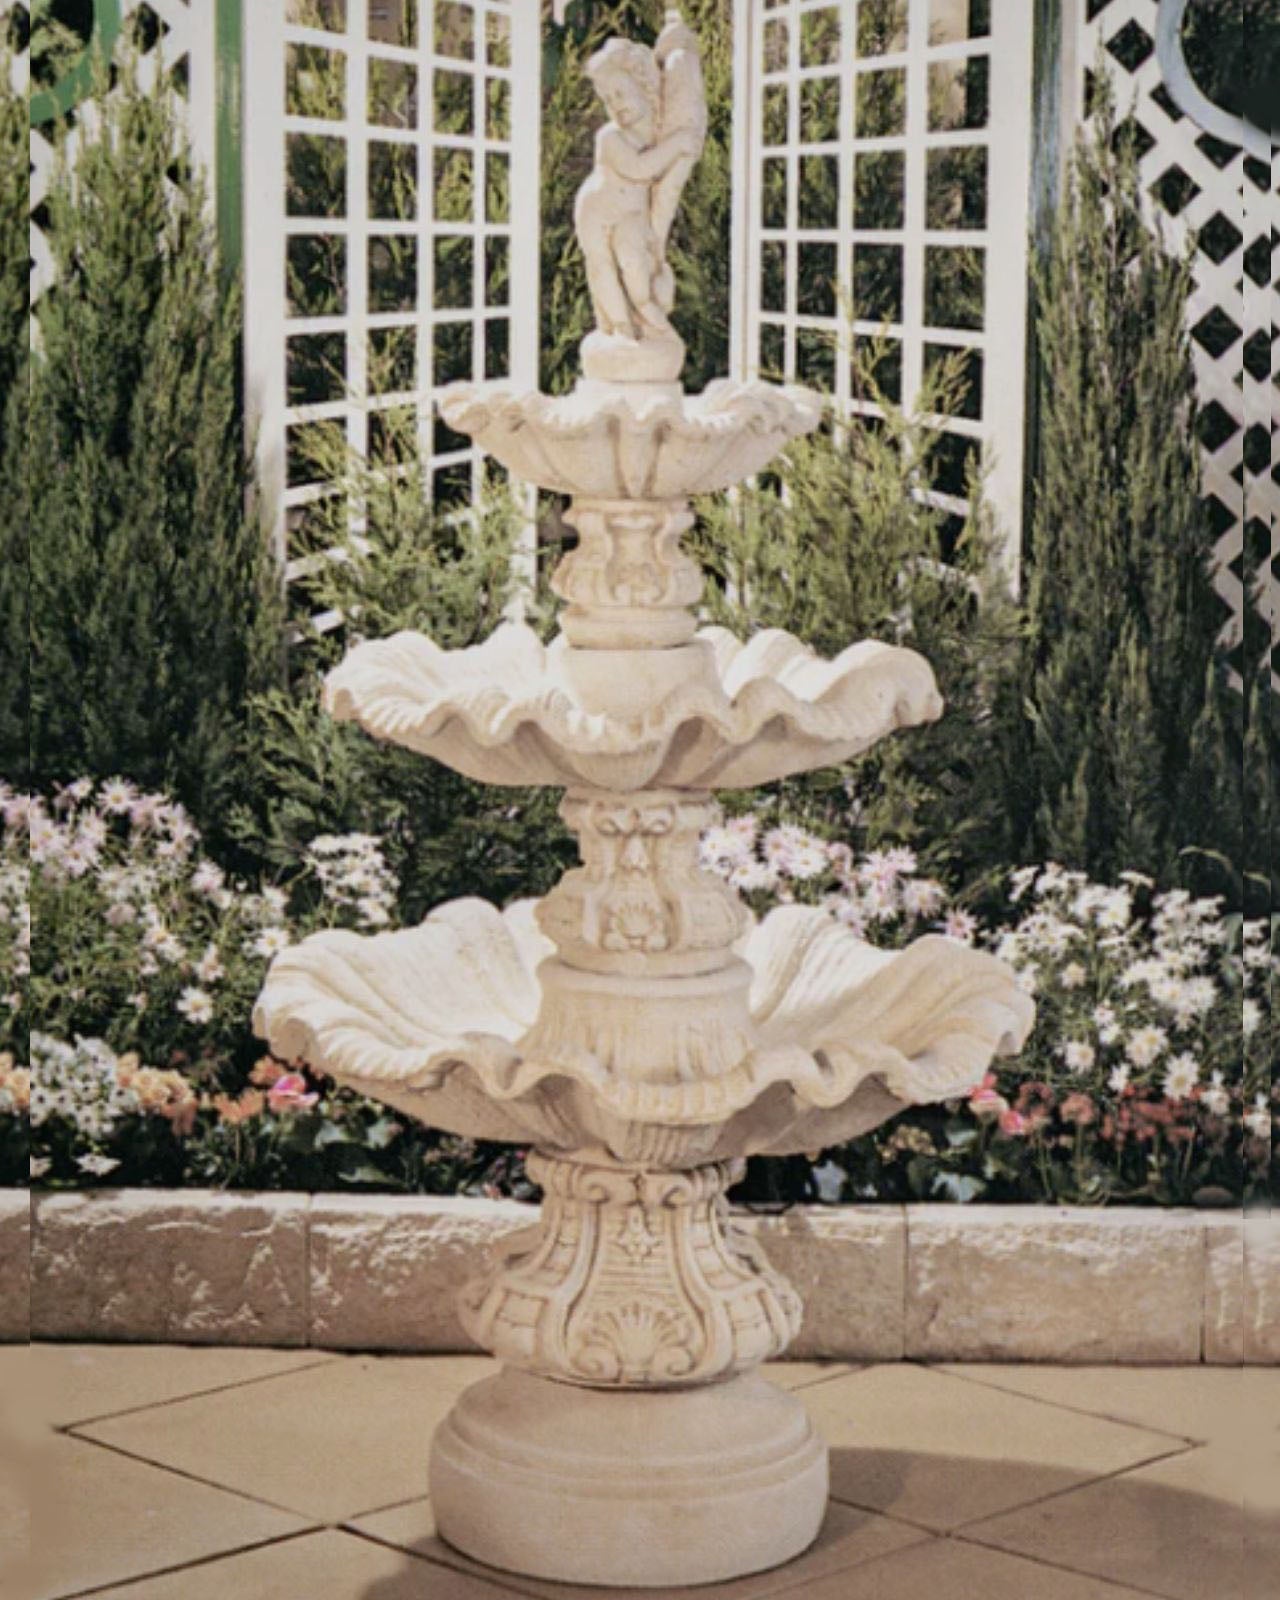 "Sicilia" fountain on display in our Sydney warehouse.